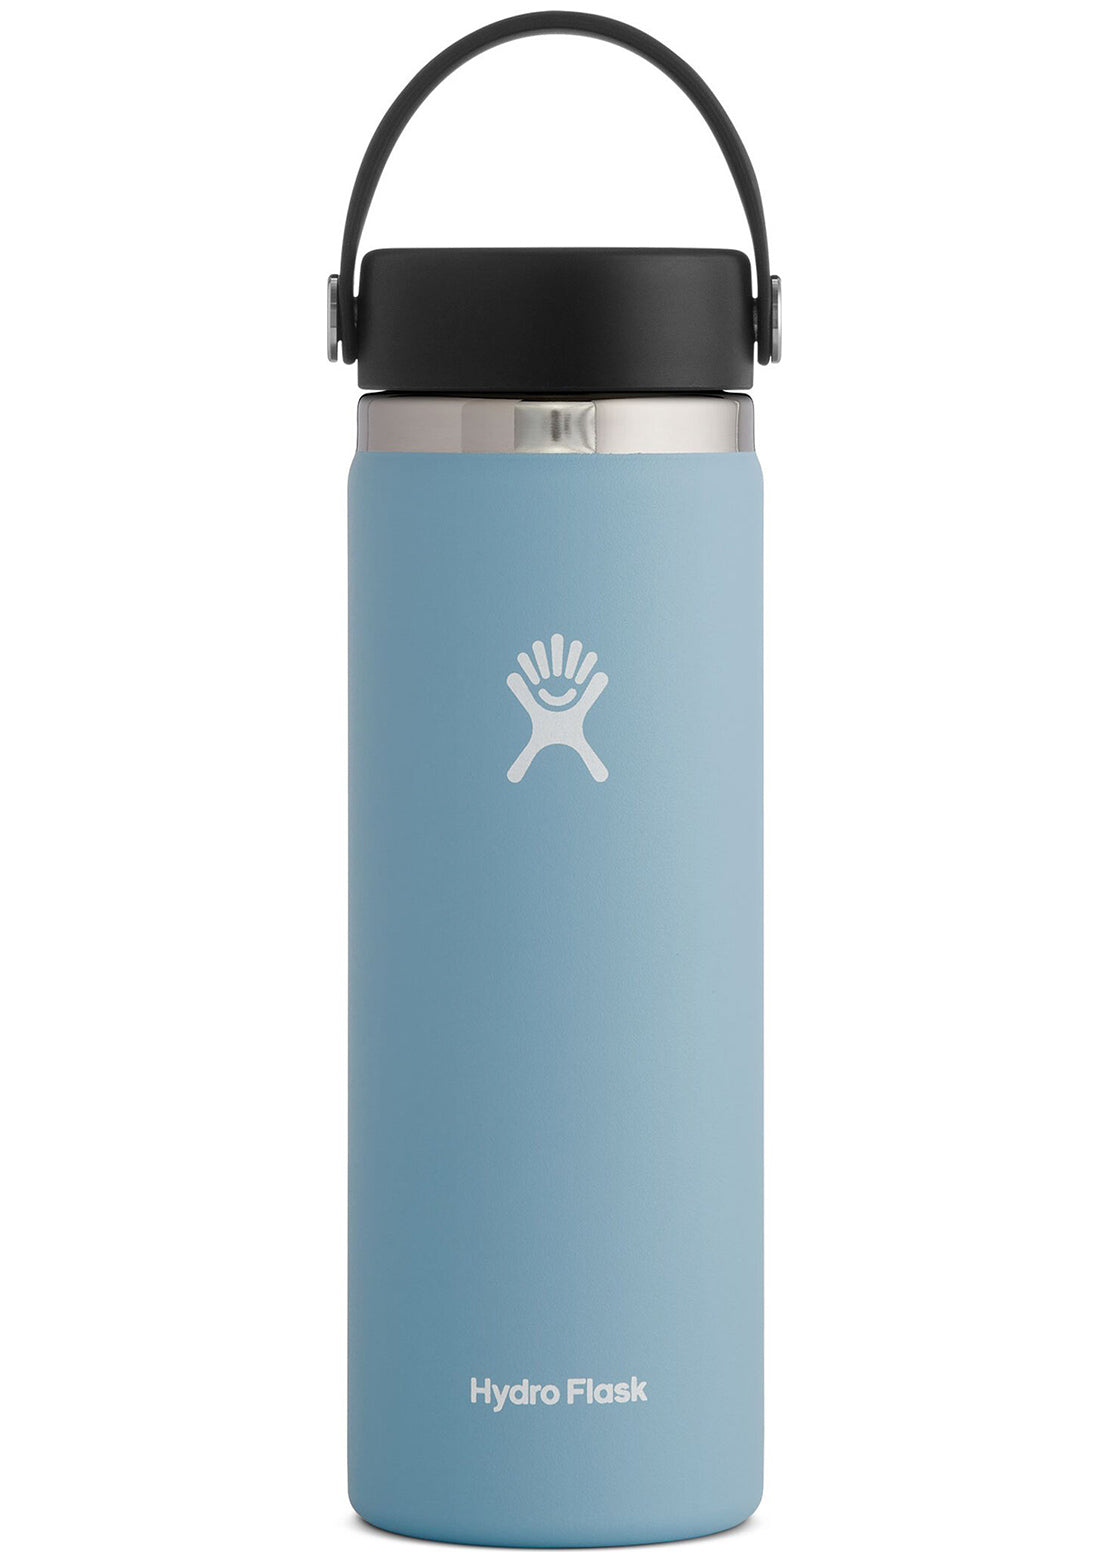 Hydro Flask 20oz Wide Mouth Insulated Bottle